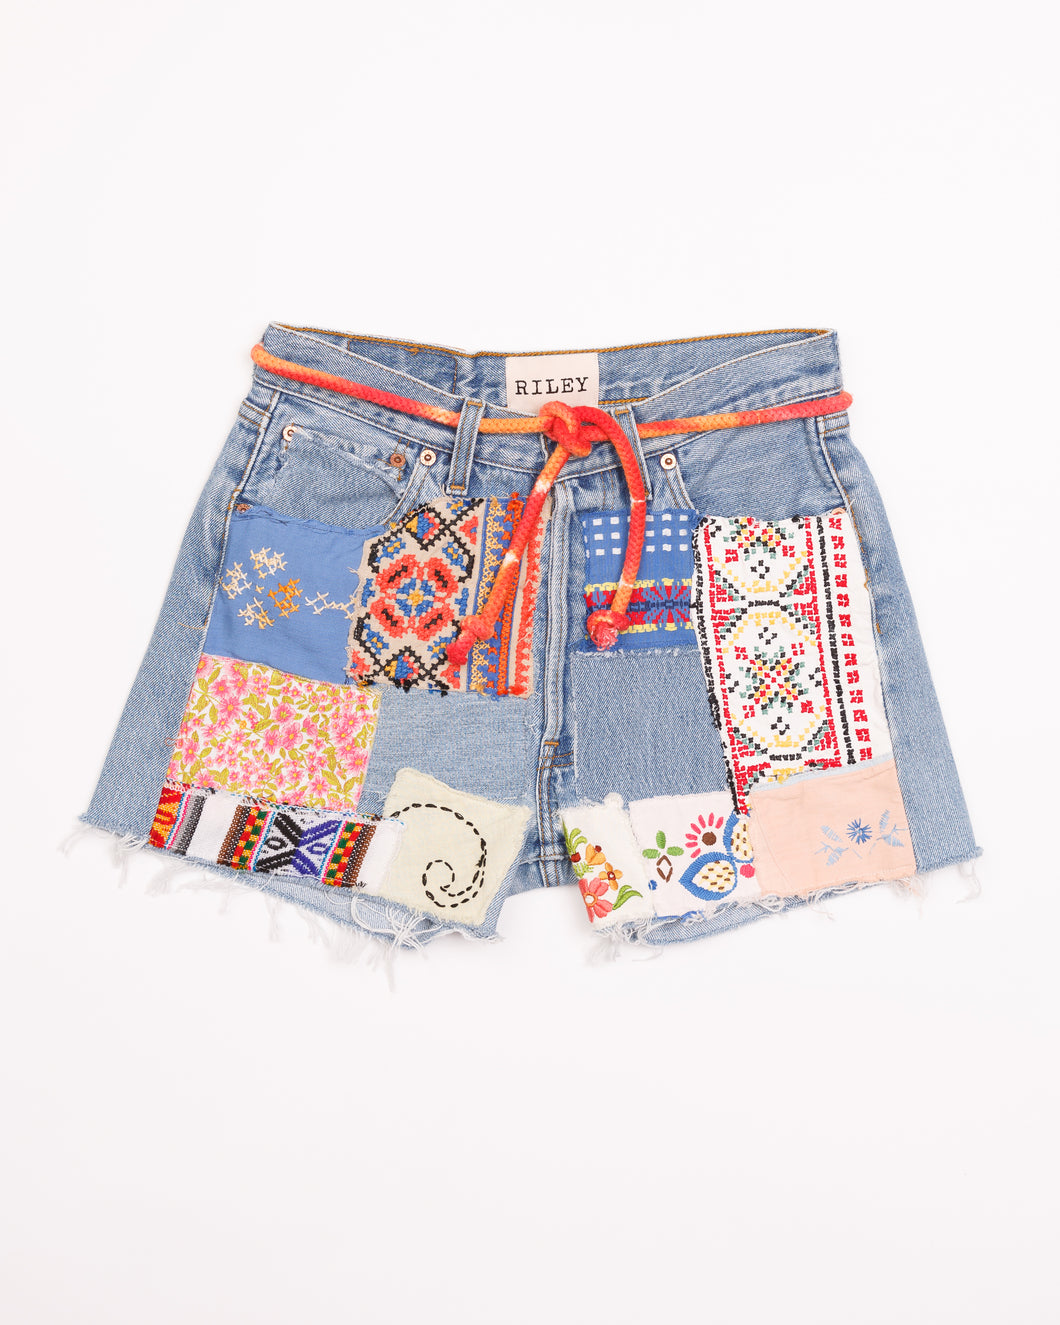 RILEY VINTAGE TOTALLY PATCHED UP DENIM CUT OFF SHORTS preorder ships in 2 weeks